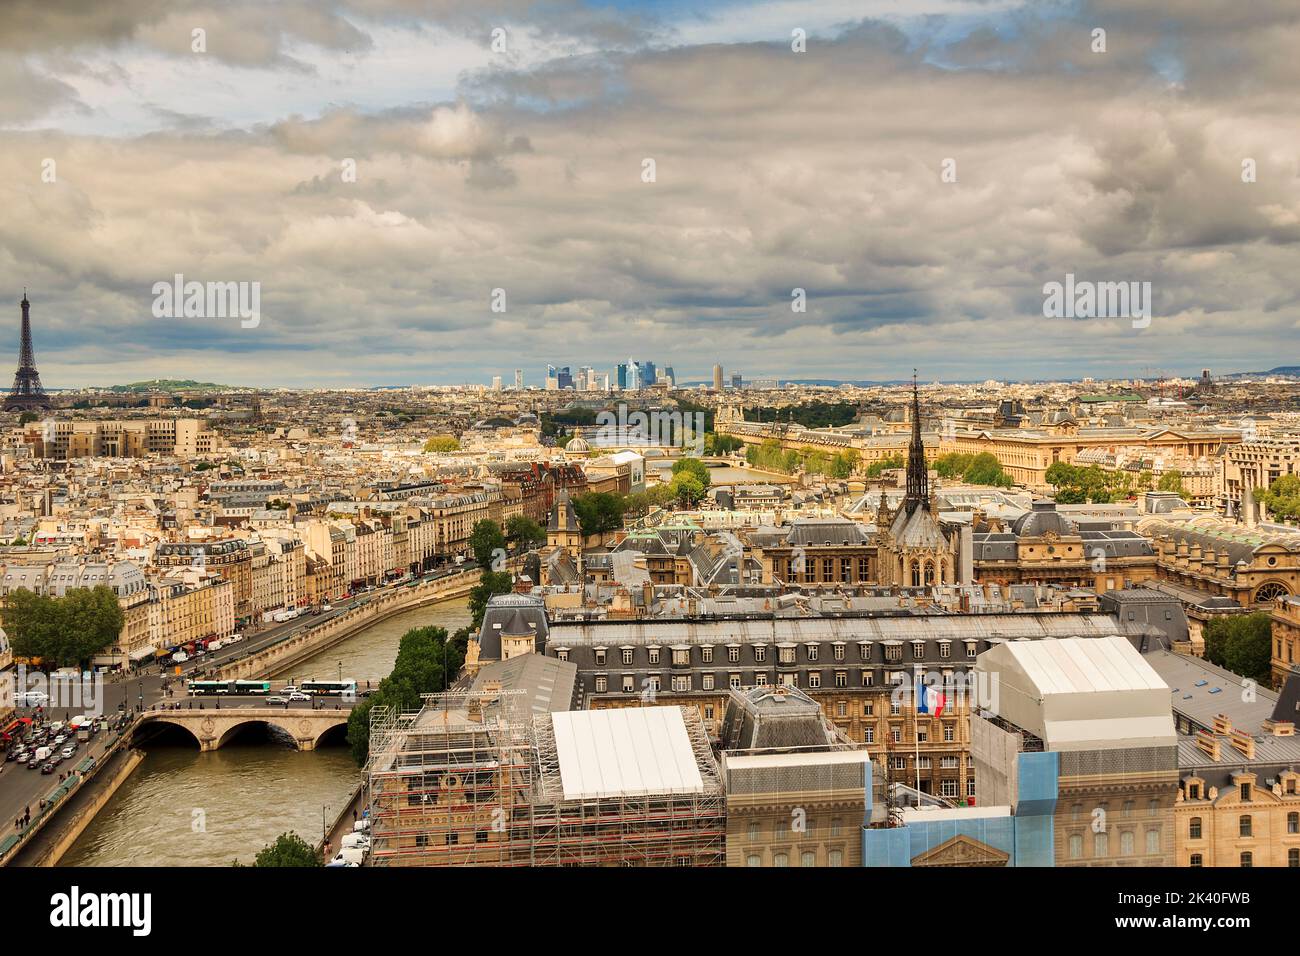 This is panoramic view of Paris from the heights of Notre-Dame de Paris May 13, 2013 in Paris, France. Stock Photo